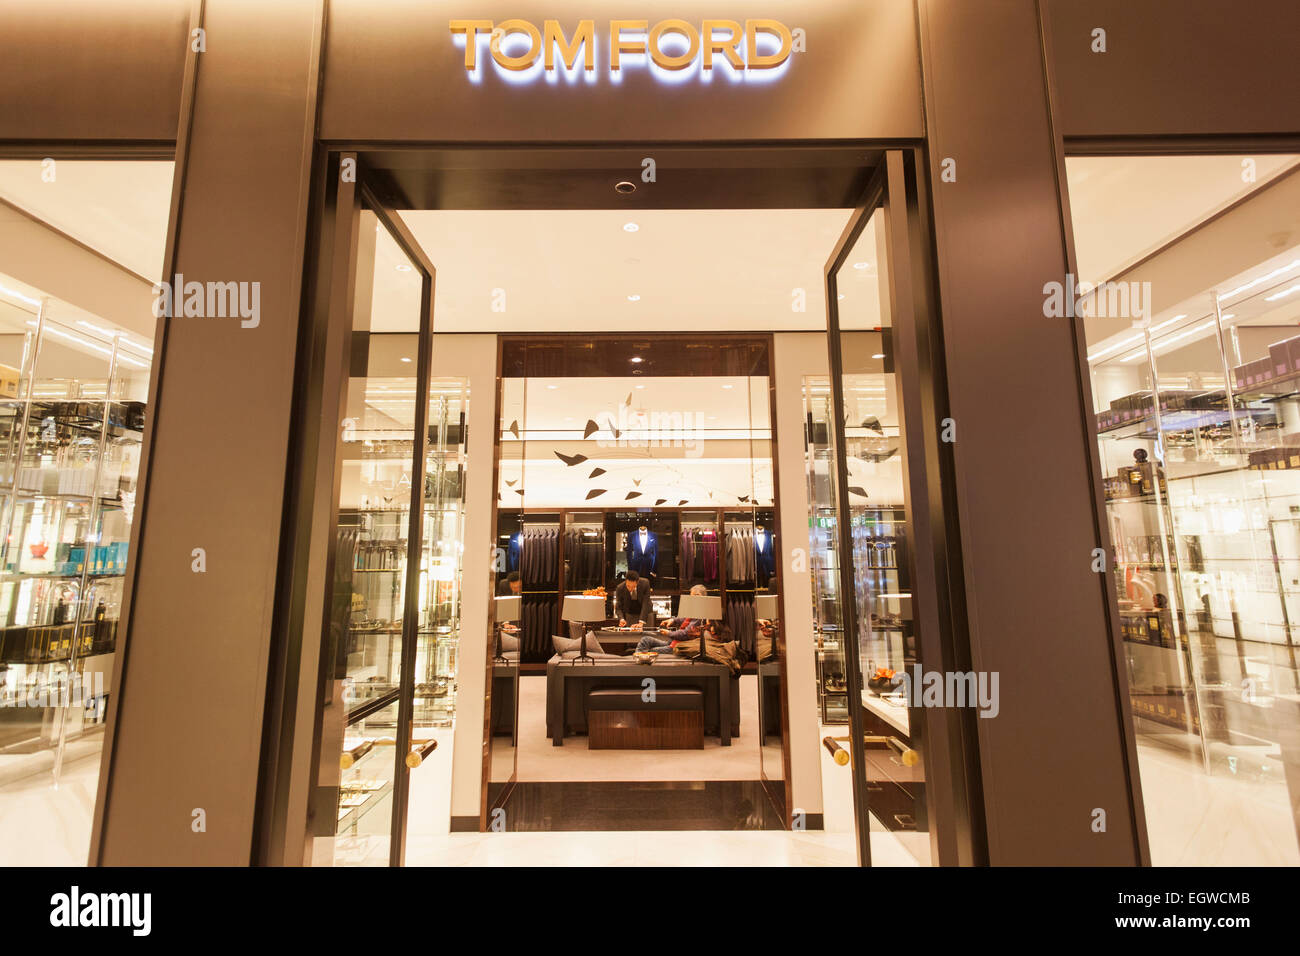 Tom ford shop hi-res stock photography and images - Alamy